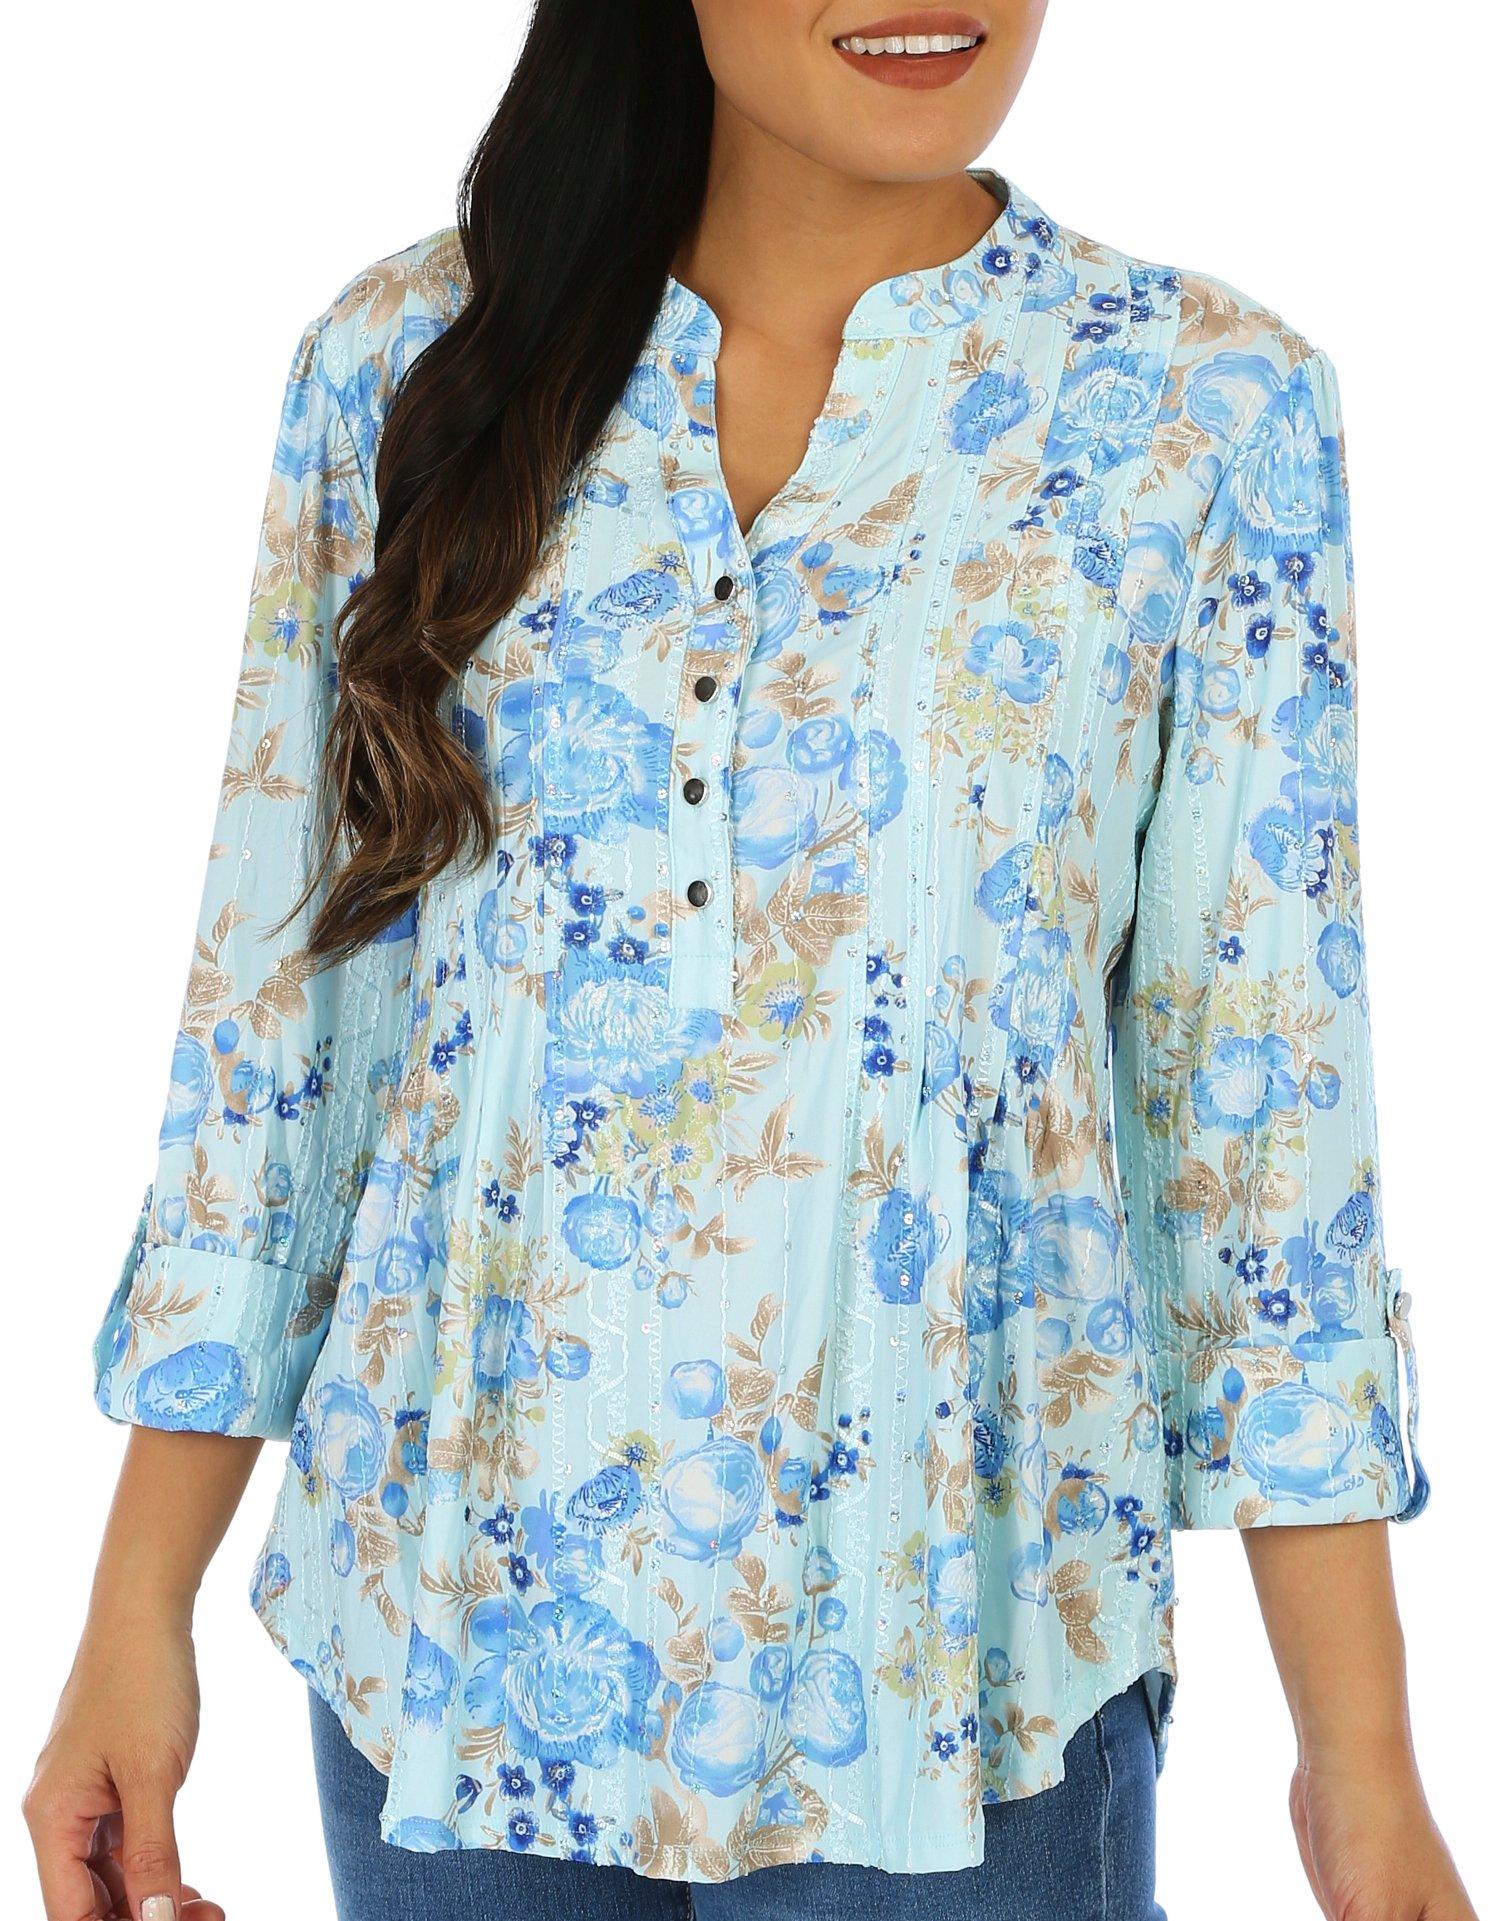 Coral Bay Womens Floral V-Neck 3/4 Sleeve Top